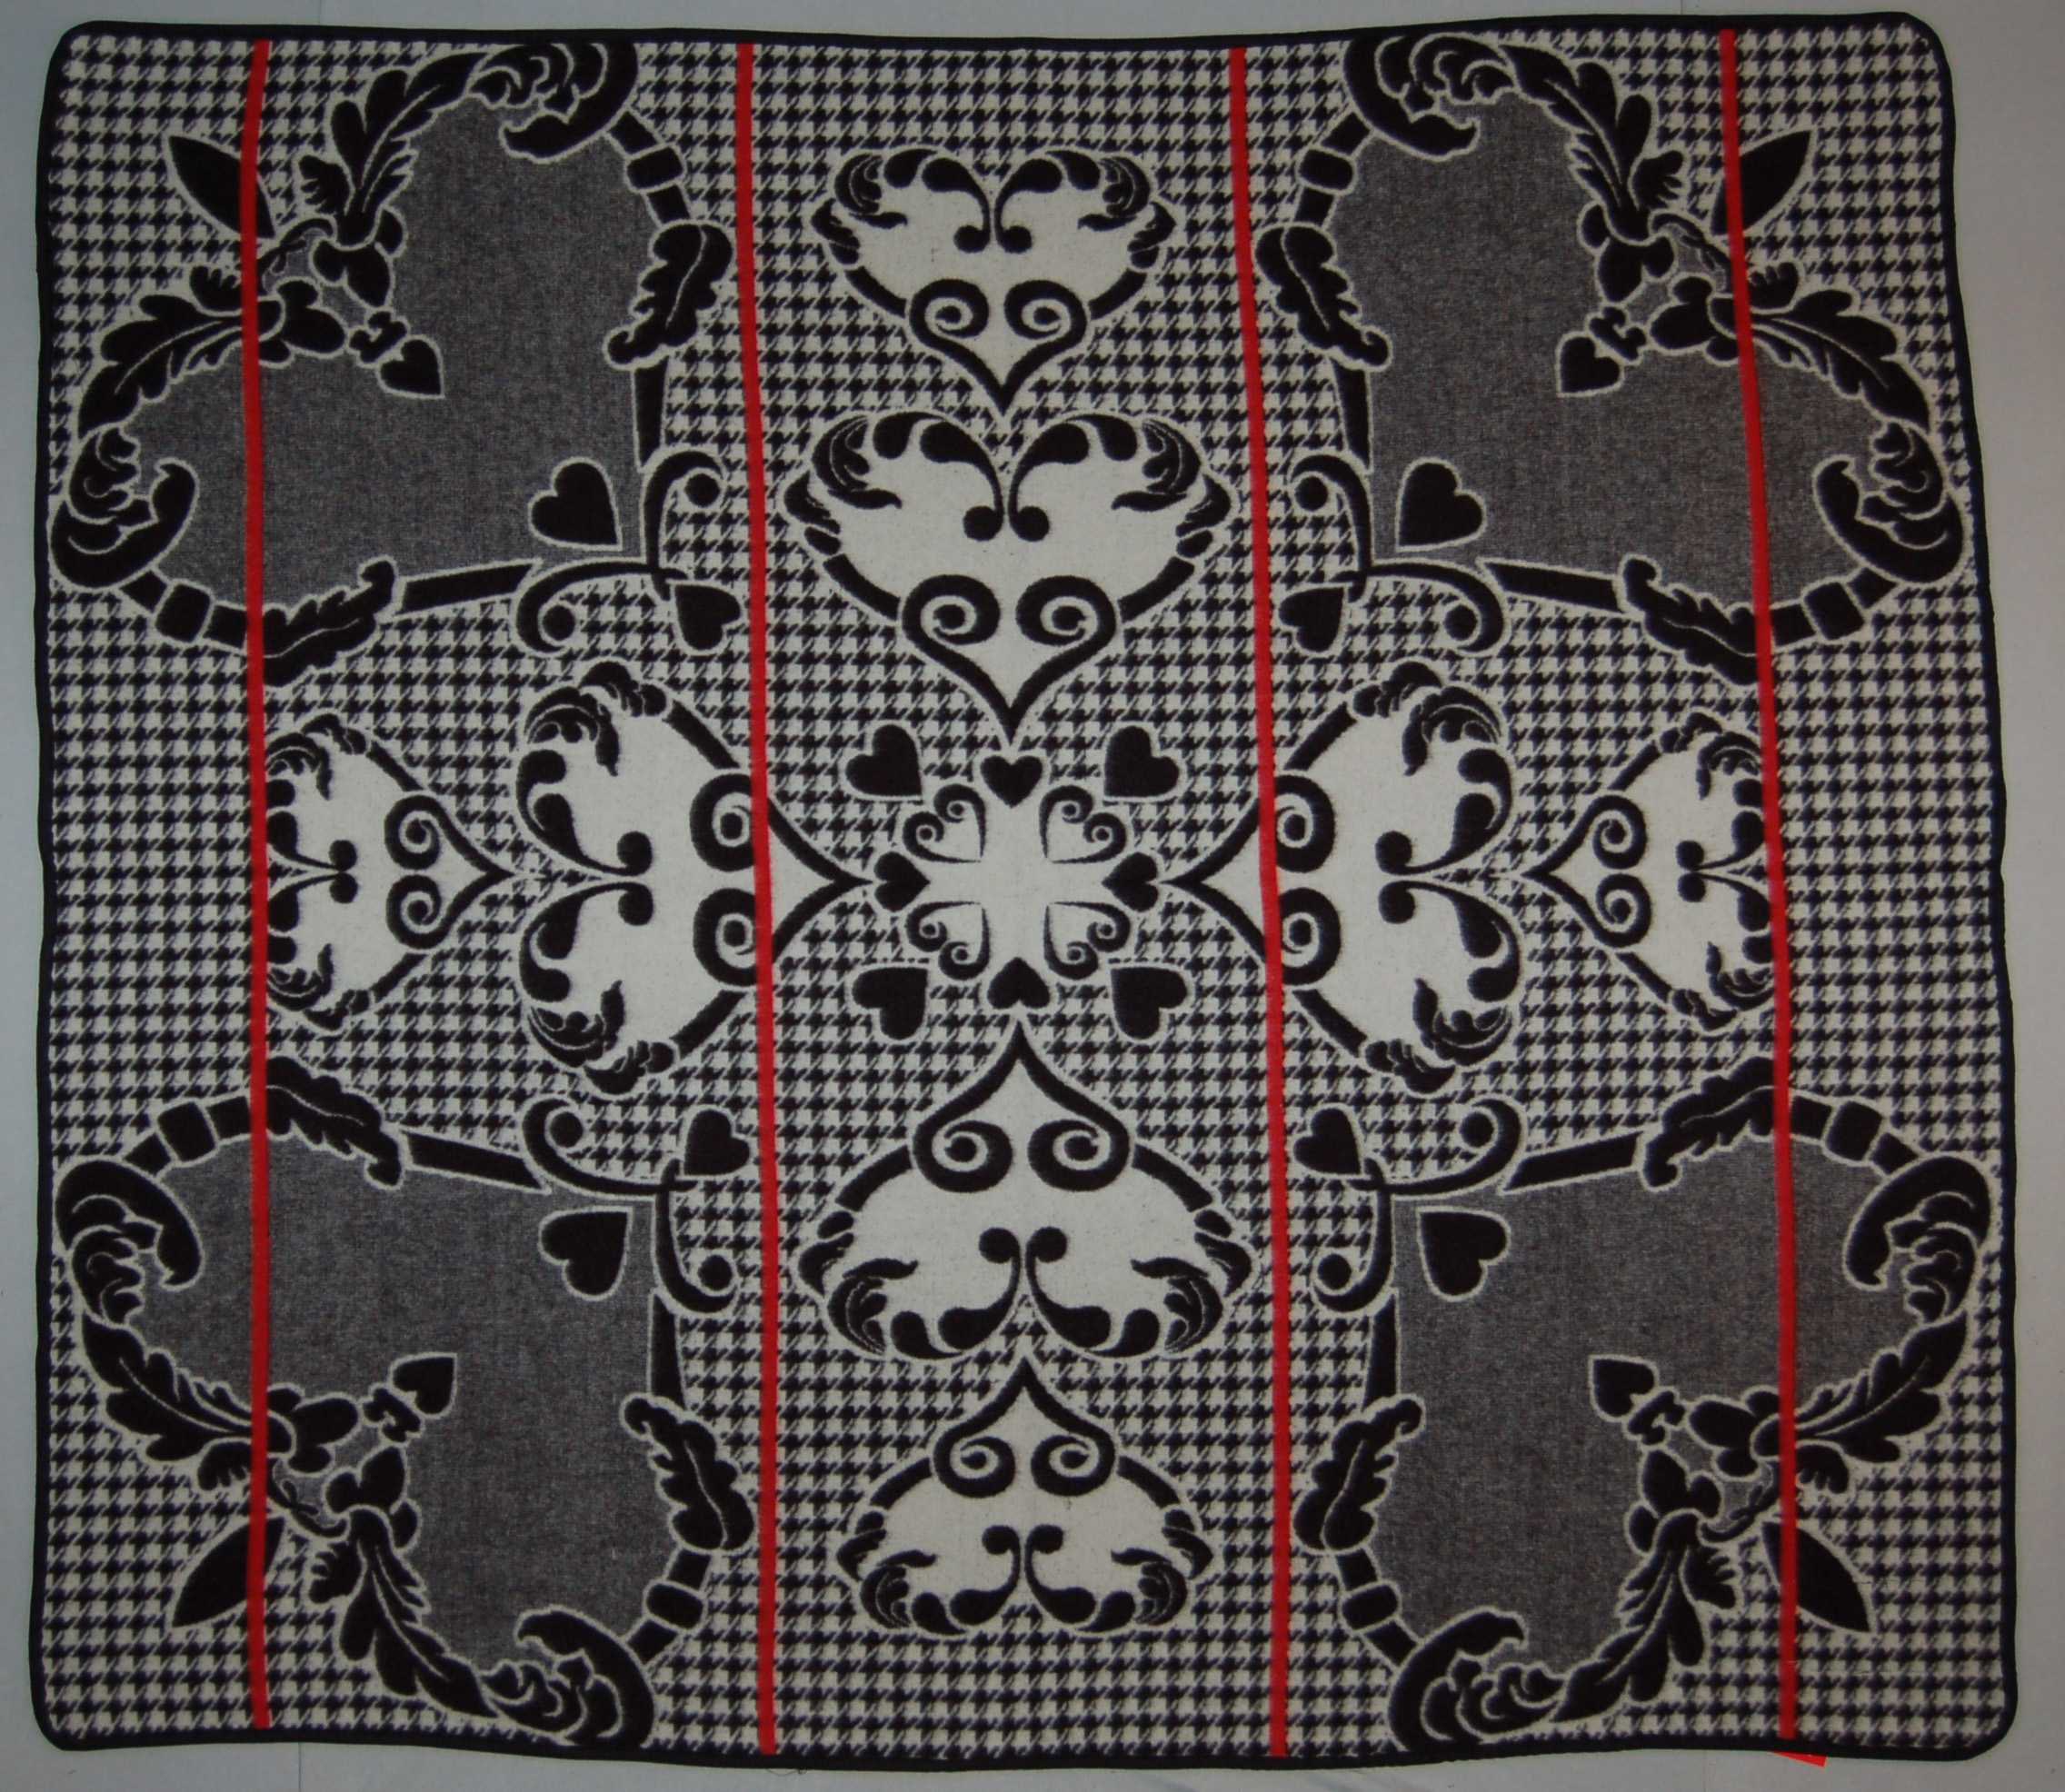 A woven blanket in the 'Khosana' design with a black and white heart pattern and pin stripes.